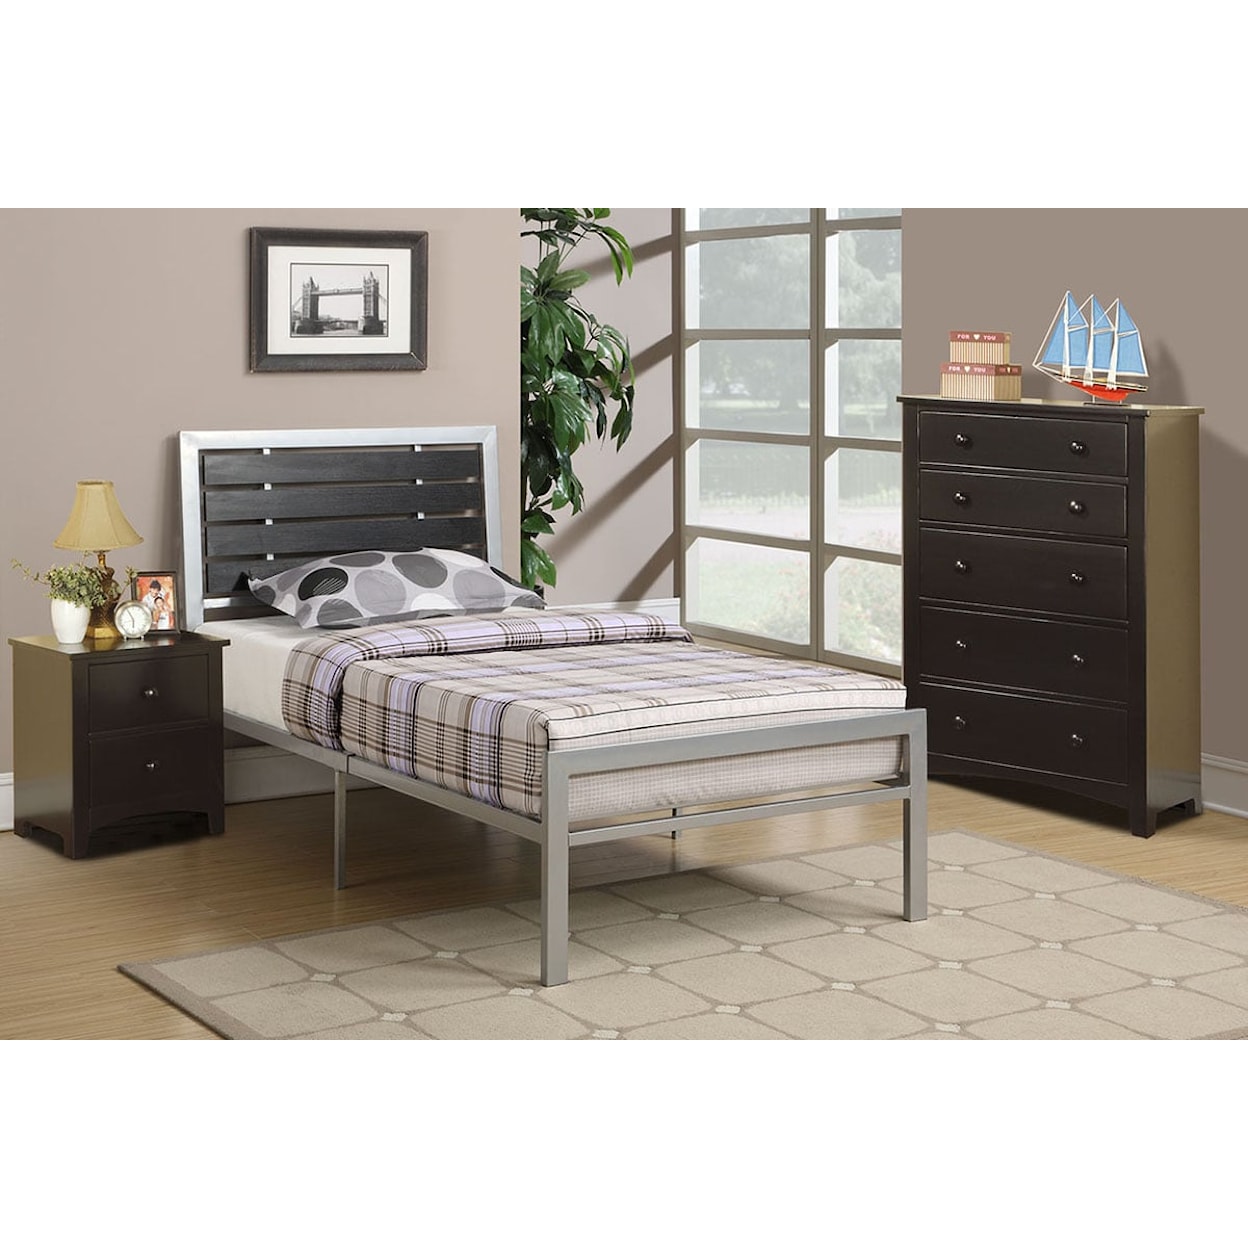 Poundex Twin/Full Beds SILVER FULL BED WITH SLATS |